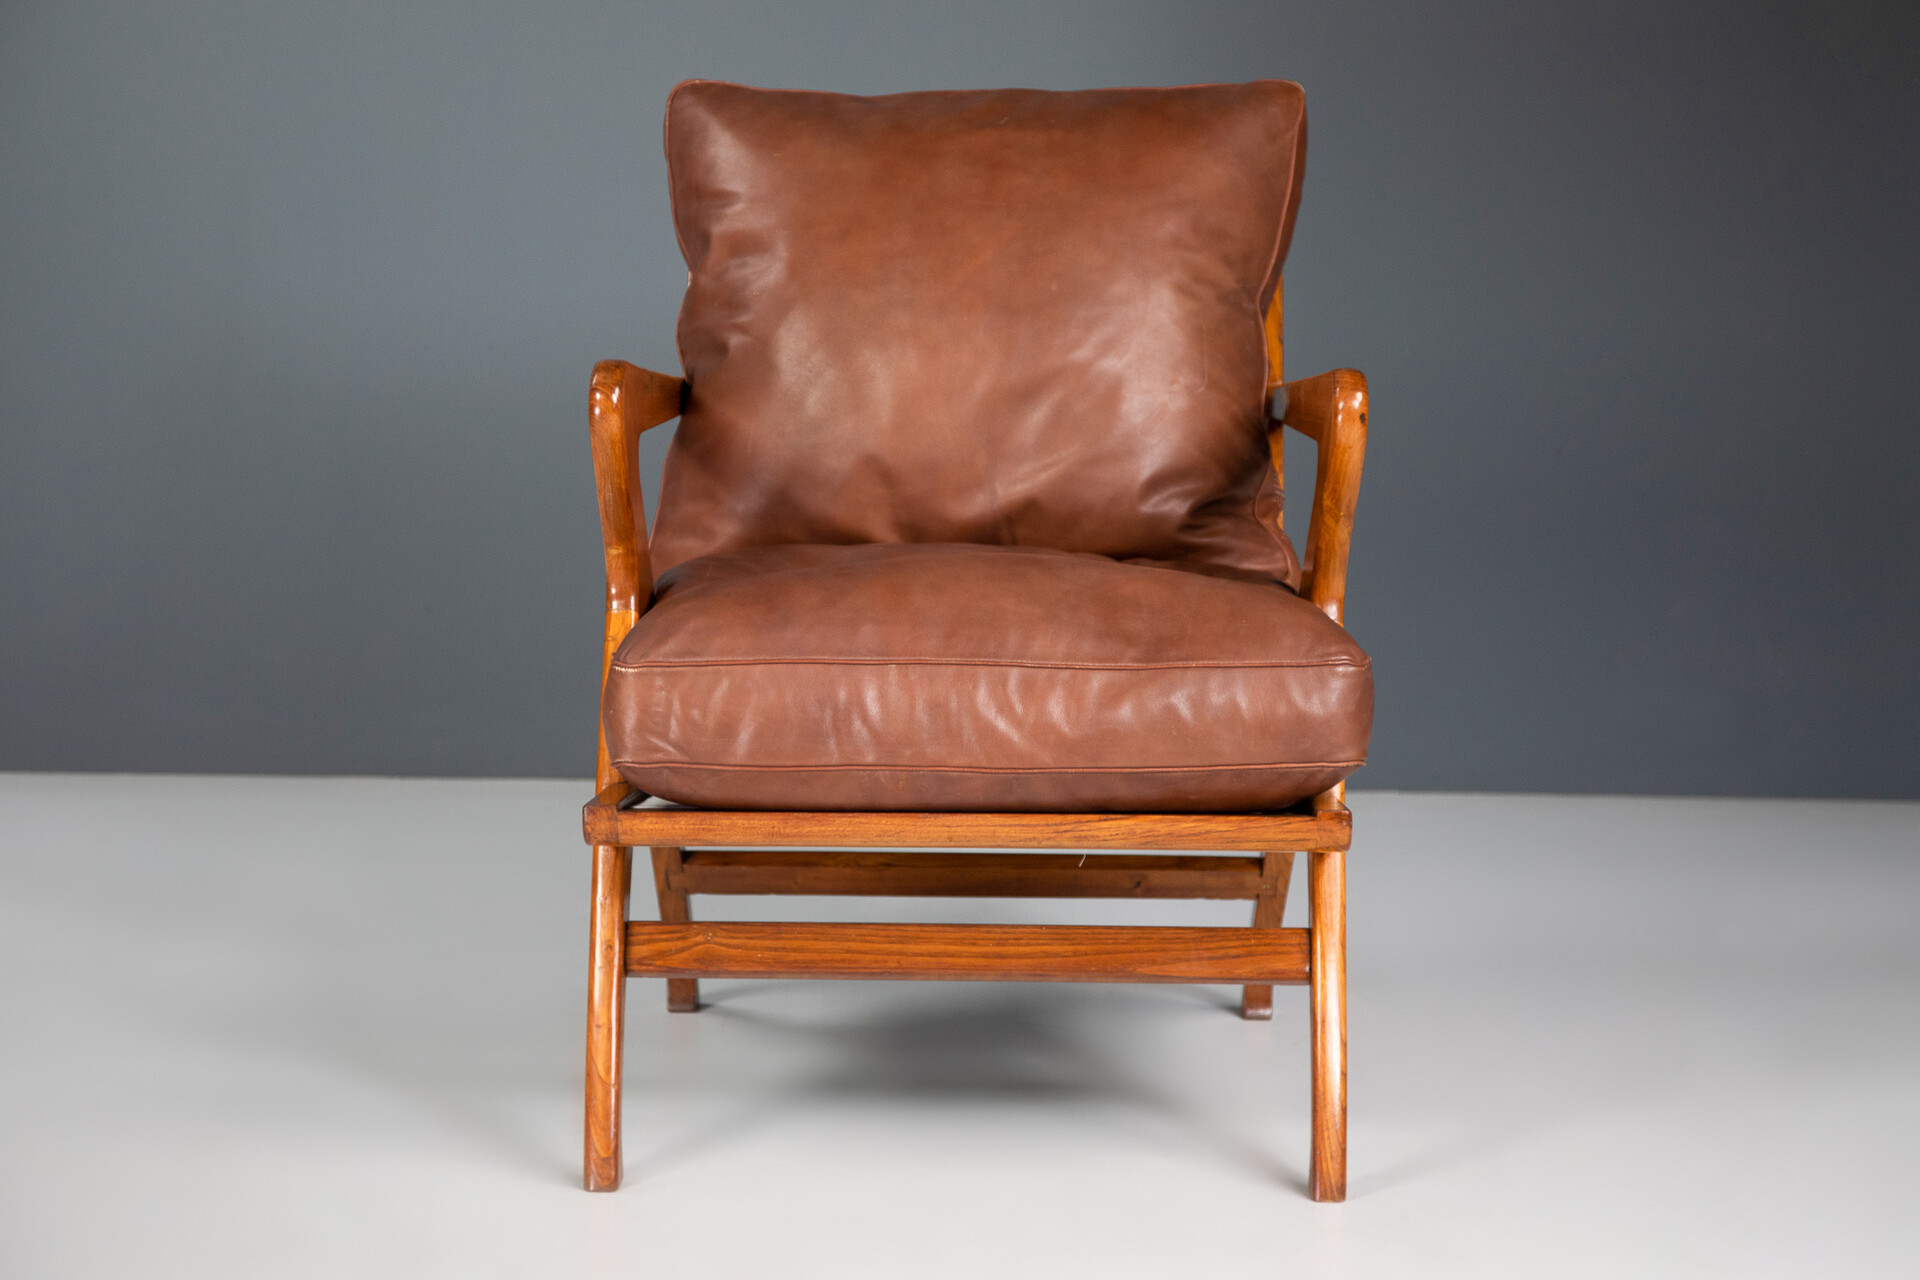 Mid century modern Elegant Lounge chair in oak and leather , Italy 1950s Mid-20th century